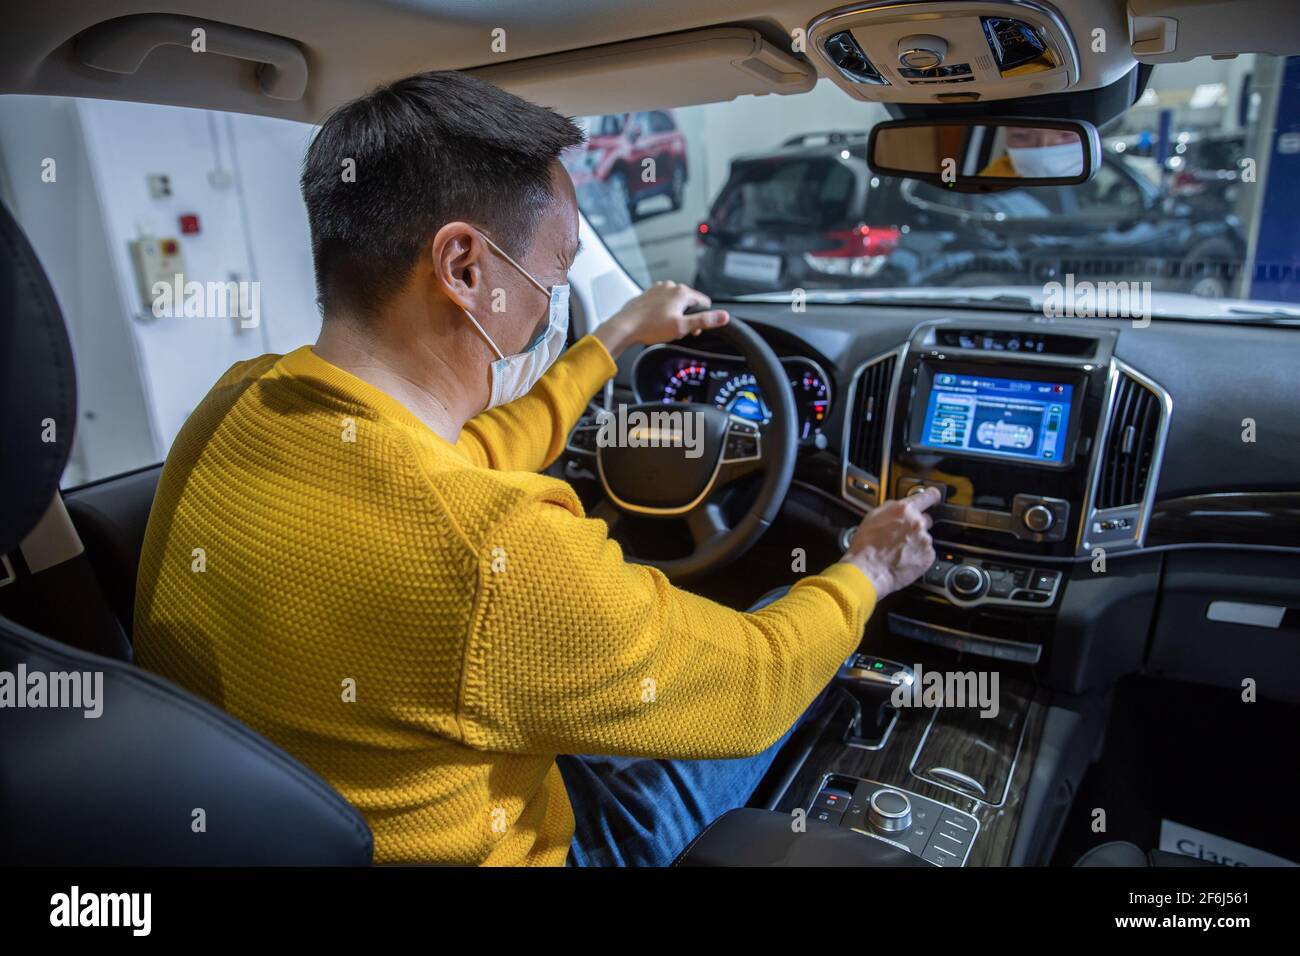 (210401) -- ALMATY, April 1, 2021 (Xinhua) -- A man tries a HAVAL car at a dealer shop in Almaty, Kazakhstan, April 1, 2021. Great Wall Motor Co., Ltd.'s HAVAL brand entered the Kazakhstan market on thursday, three main models of crossover vehicles F7, F7x and off-road vehicle H9 officially began the sales to Kazakhstan residents in Almaty. (Astana Motors/Handout via Xinhua) Stock Photo